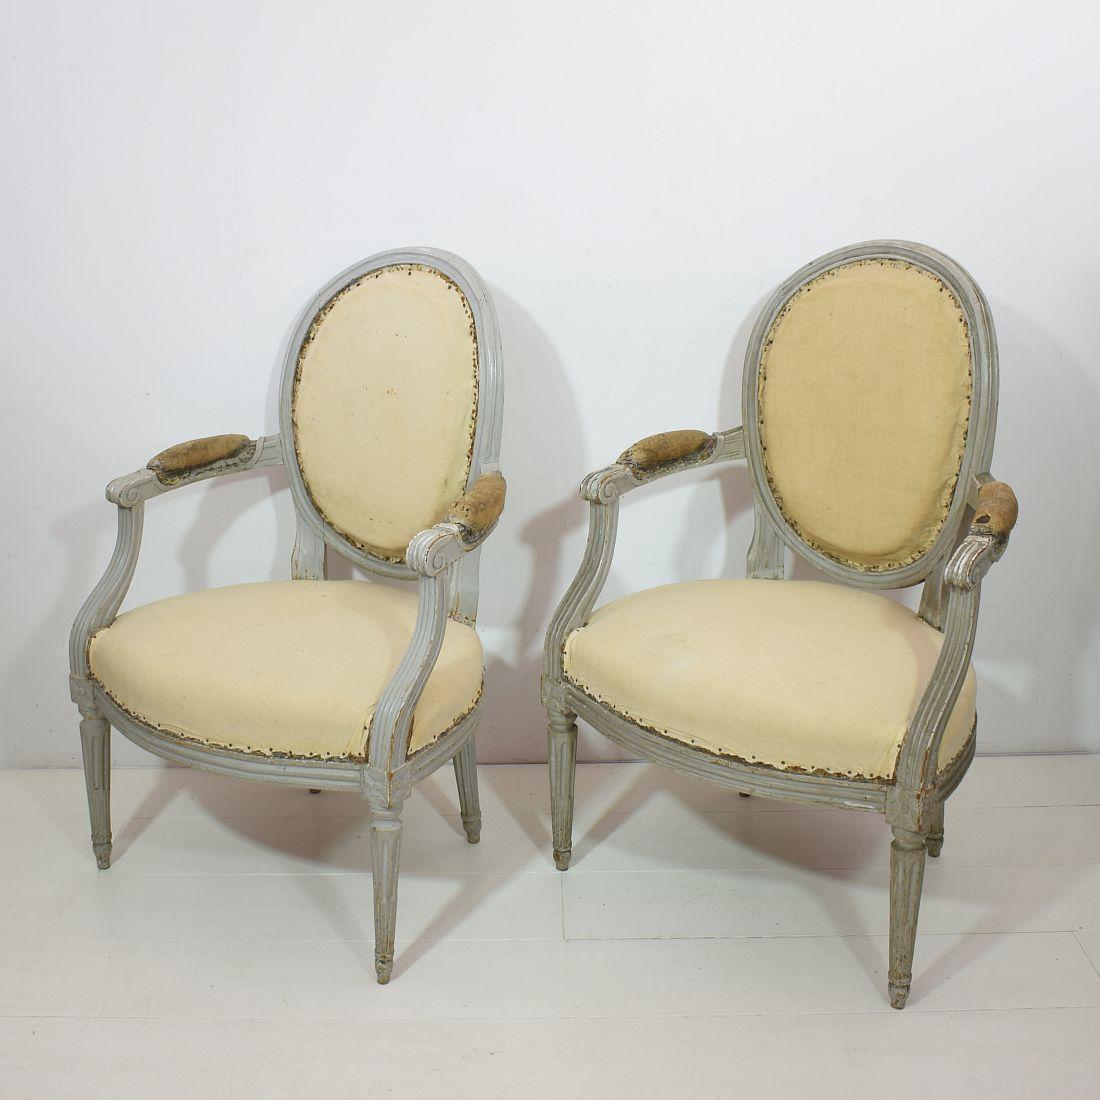 Beautiful pair of Louis XVI chairs with old color,
France, 18th century. Despite of their high age, the chairs are in a relative good condition but of course need new lining.
Seat height is 42 cm. Weathered and small losses

More pictures